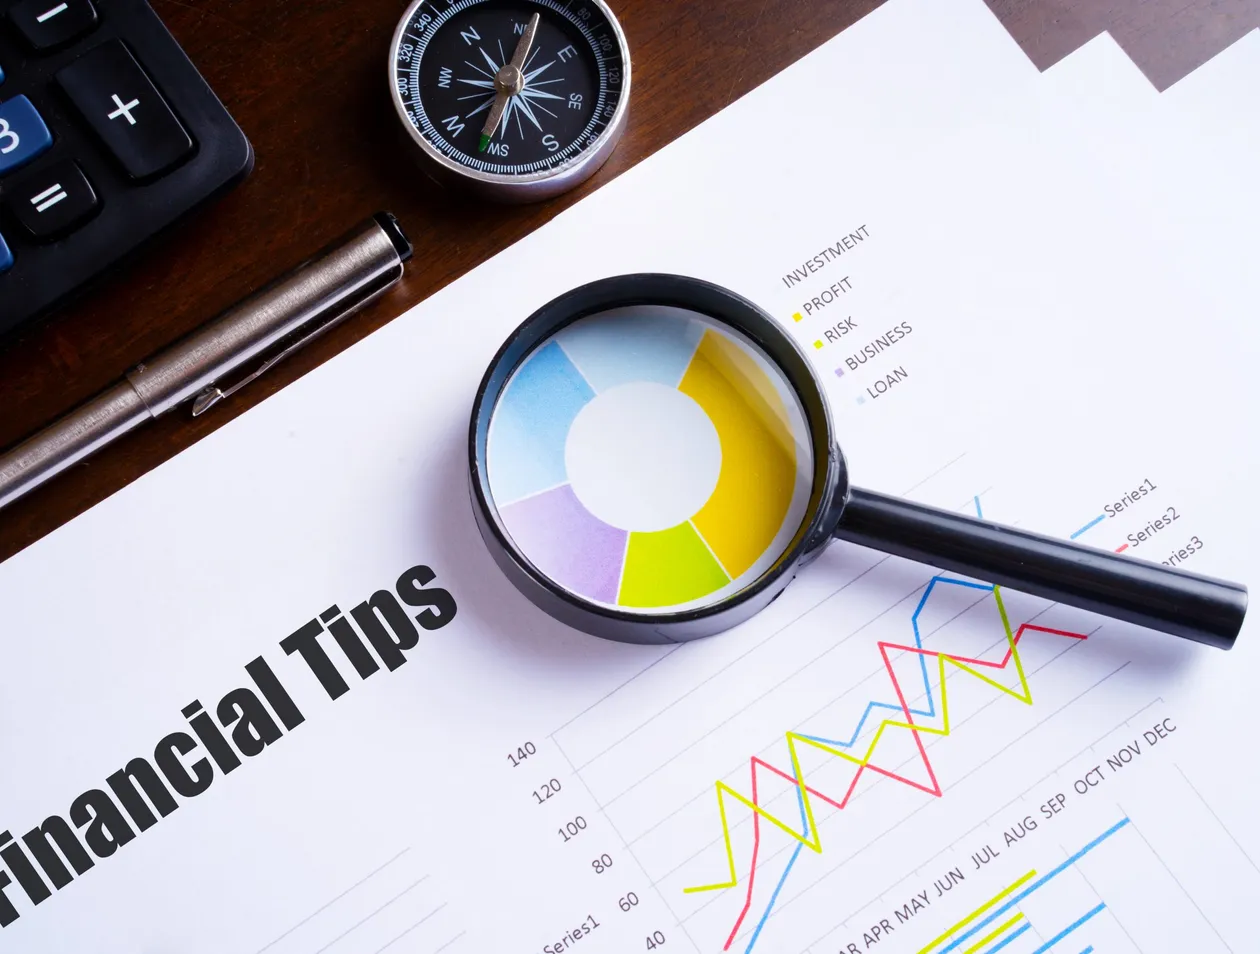 What are 5 financial tips to help you be successful in Real Estate Investing?